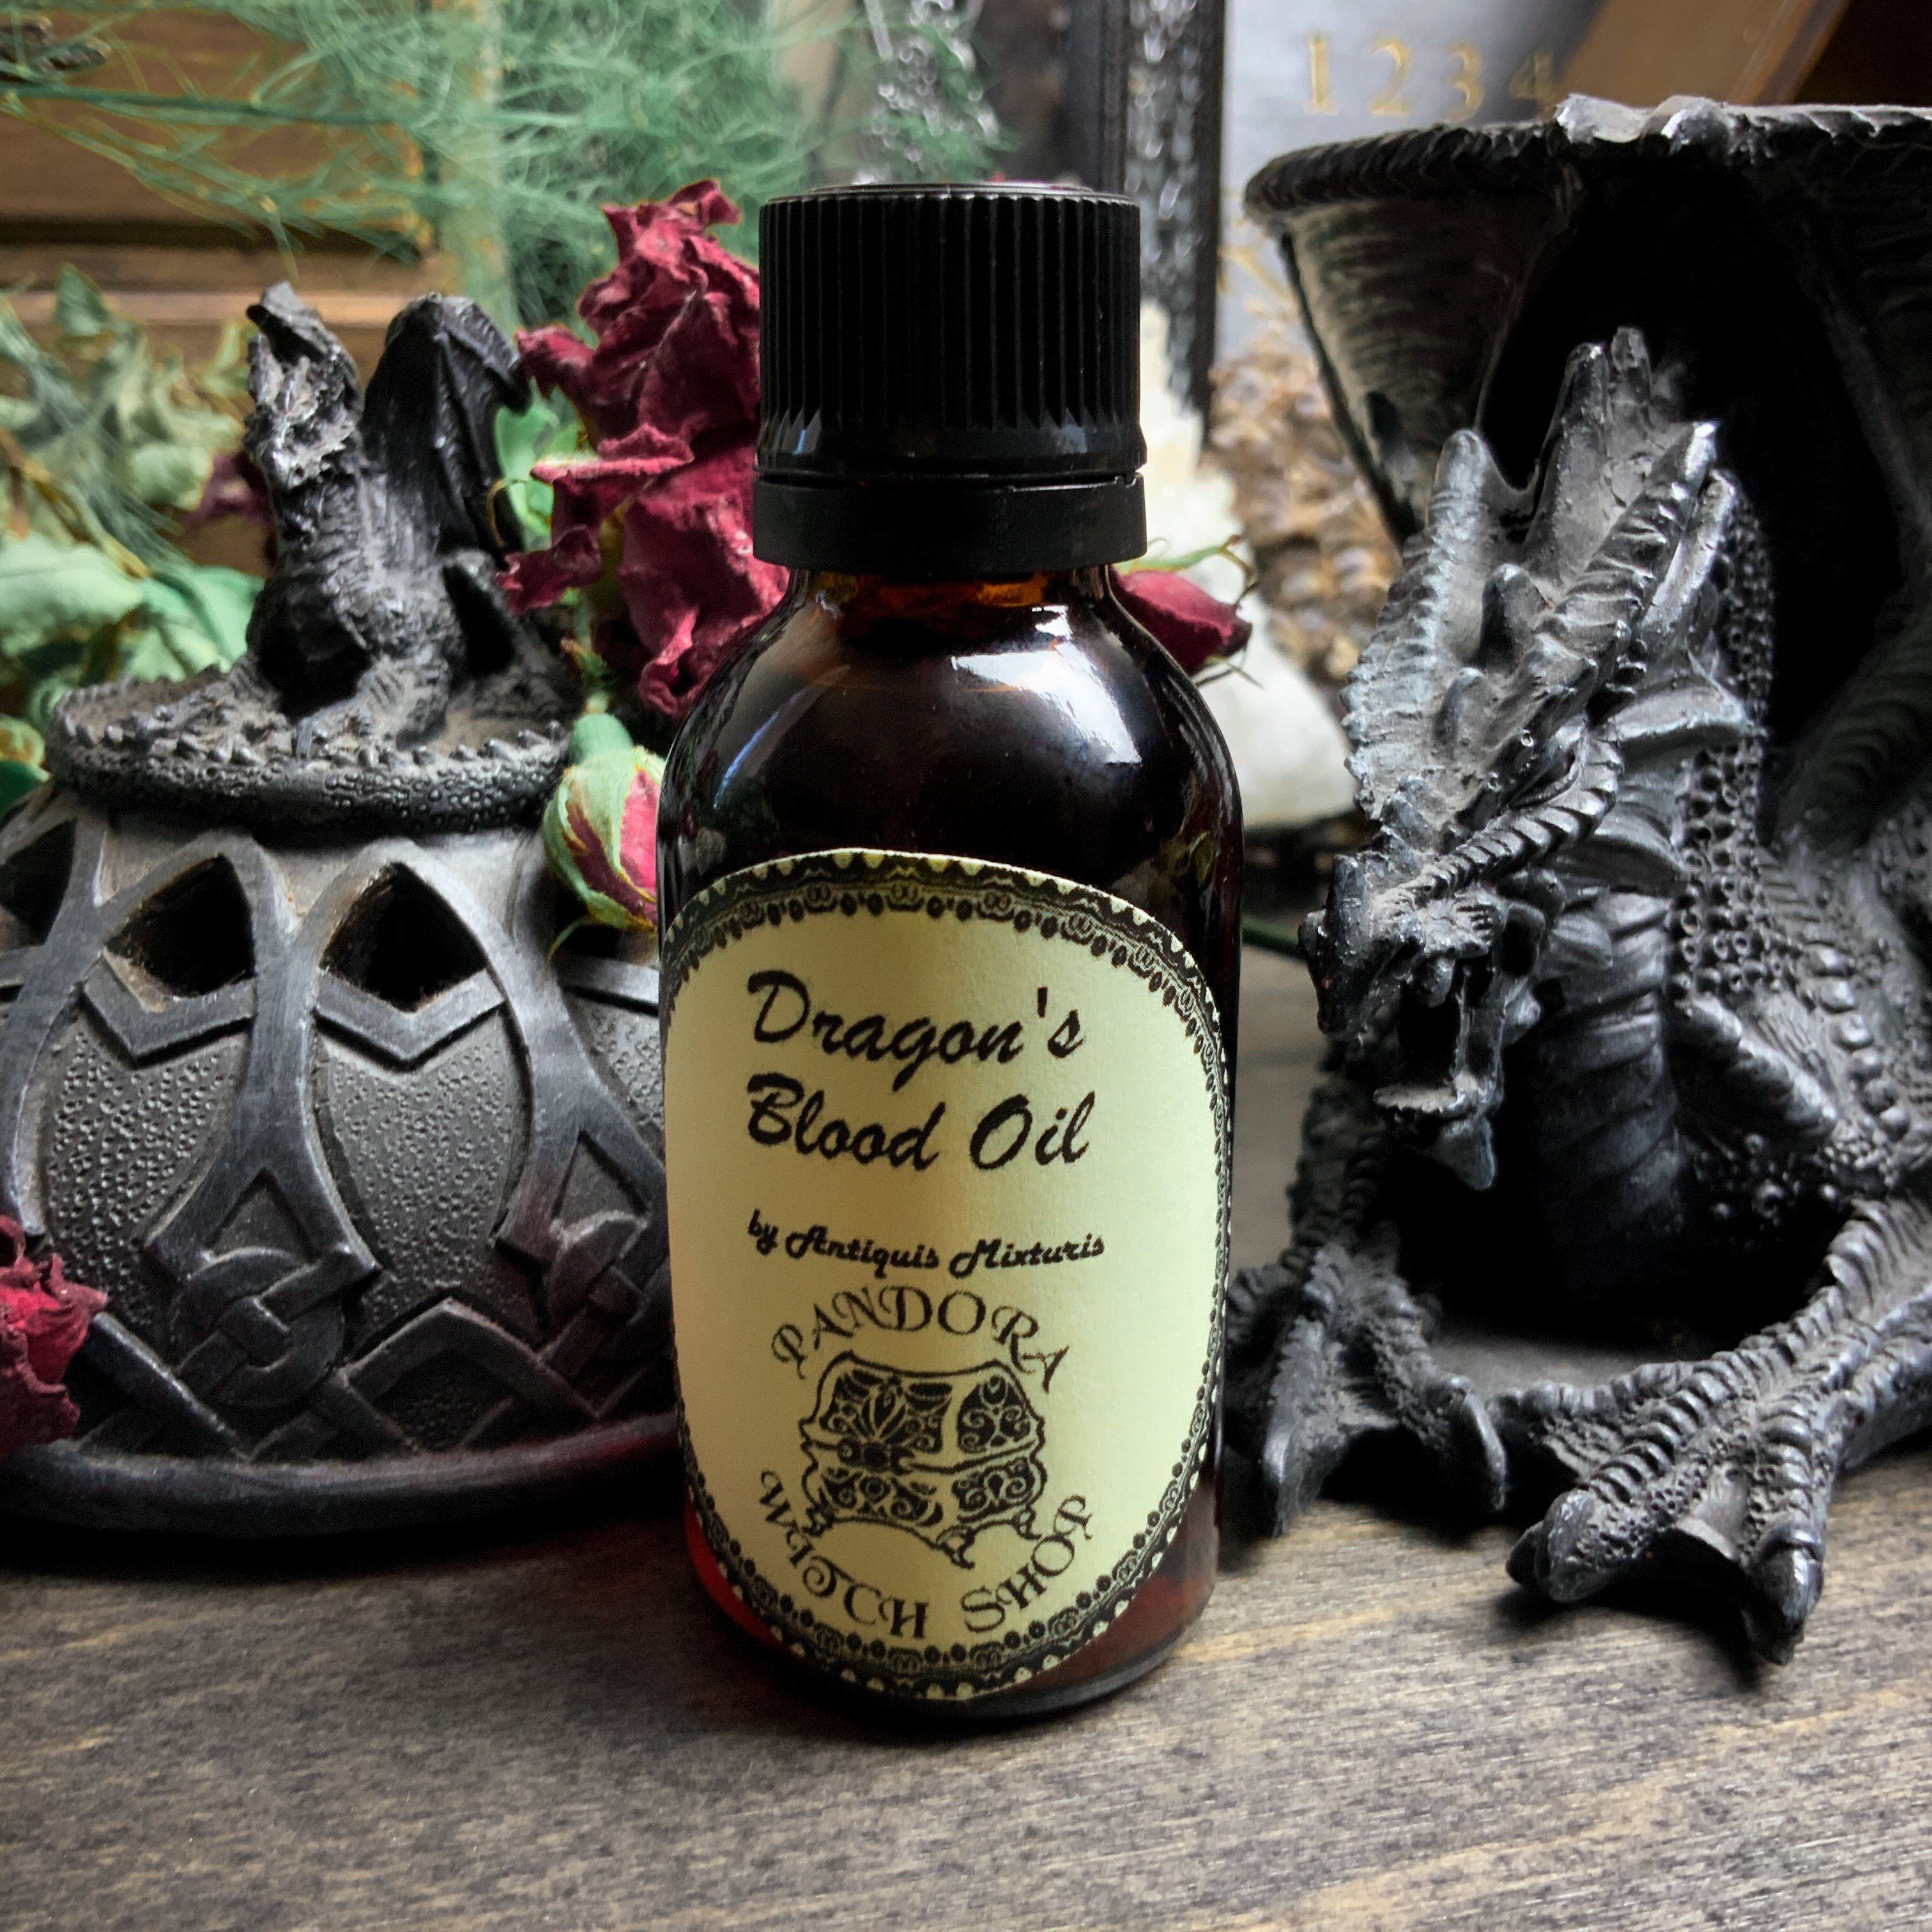  Dragons Blood Spell Ritual Oil, Pagan Oils sacred Essential  blend, Anointing Oil, Fragrance Oil, Wicca Witchery Perfume : Handmade  Products